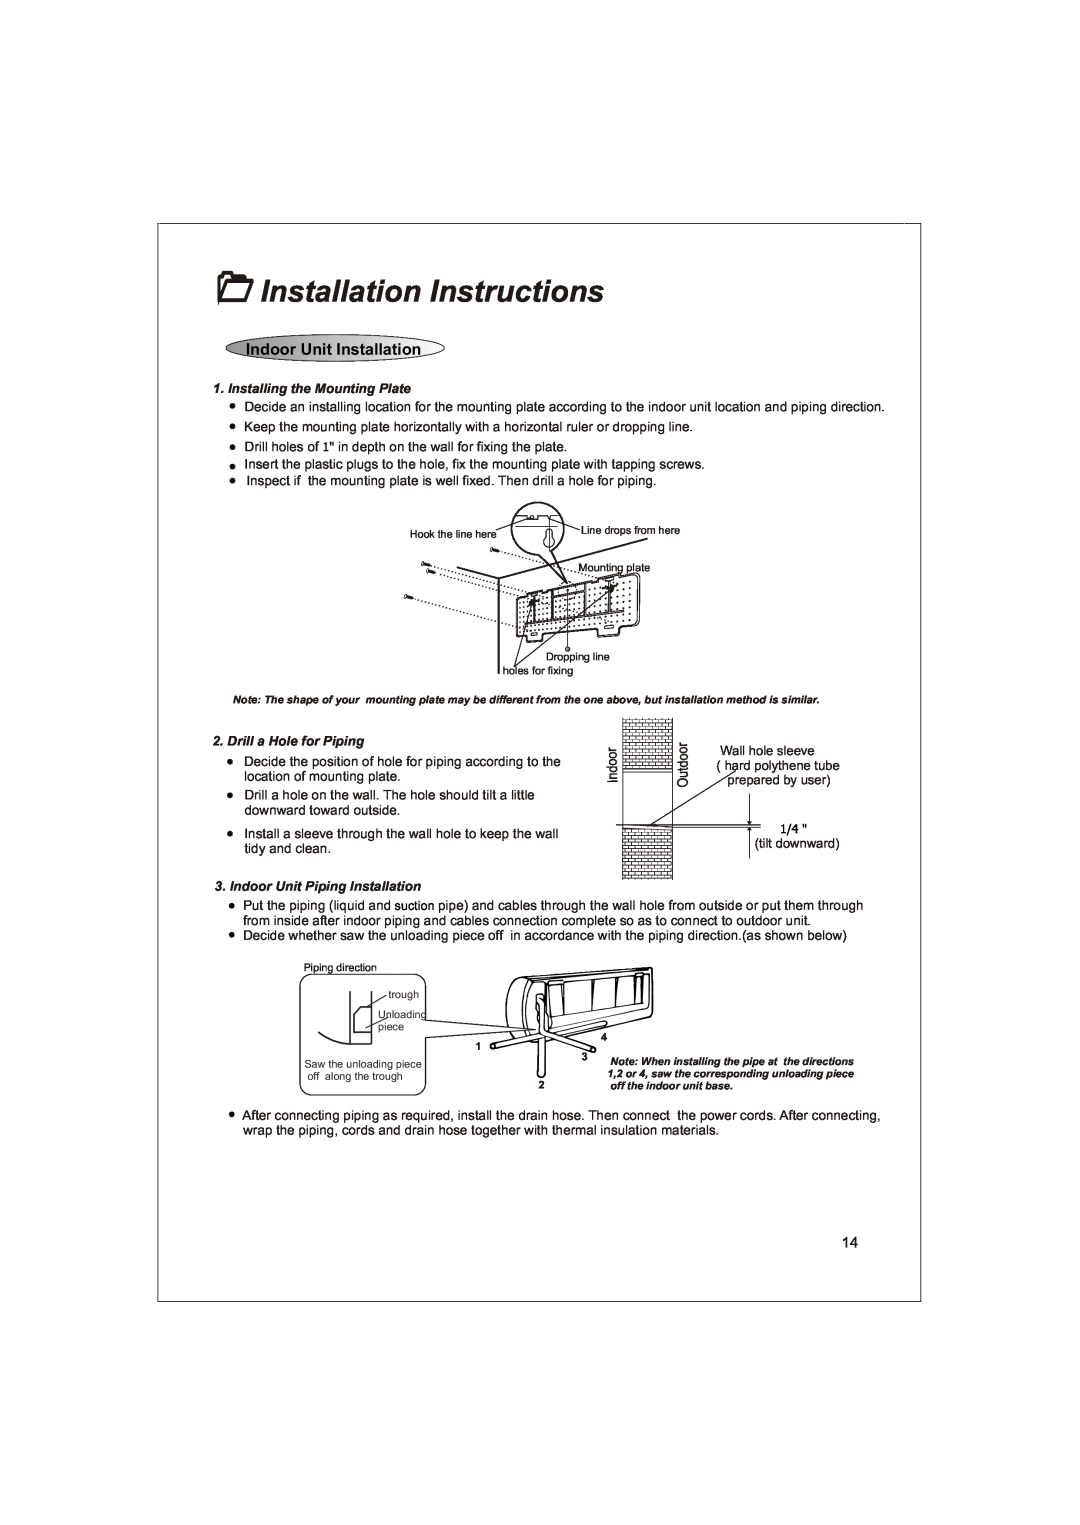 Soleus Air KFTHP-12-ID, KFTHP-18-OD 1Installation Instructions, Indoor Unit Installation, Installing the Mounting Plate 